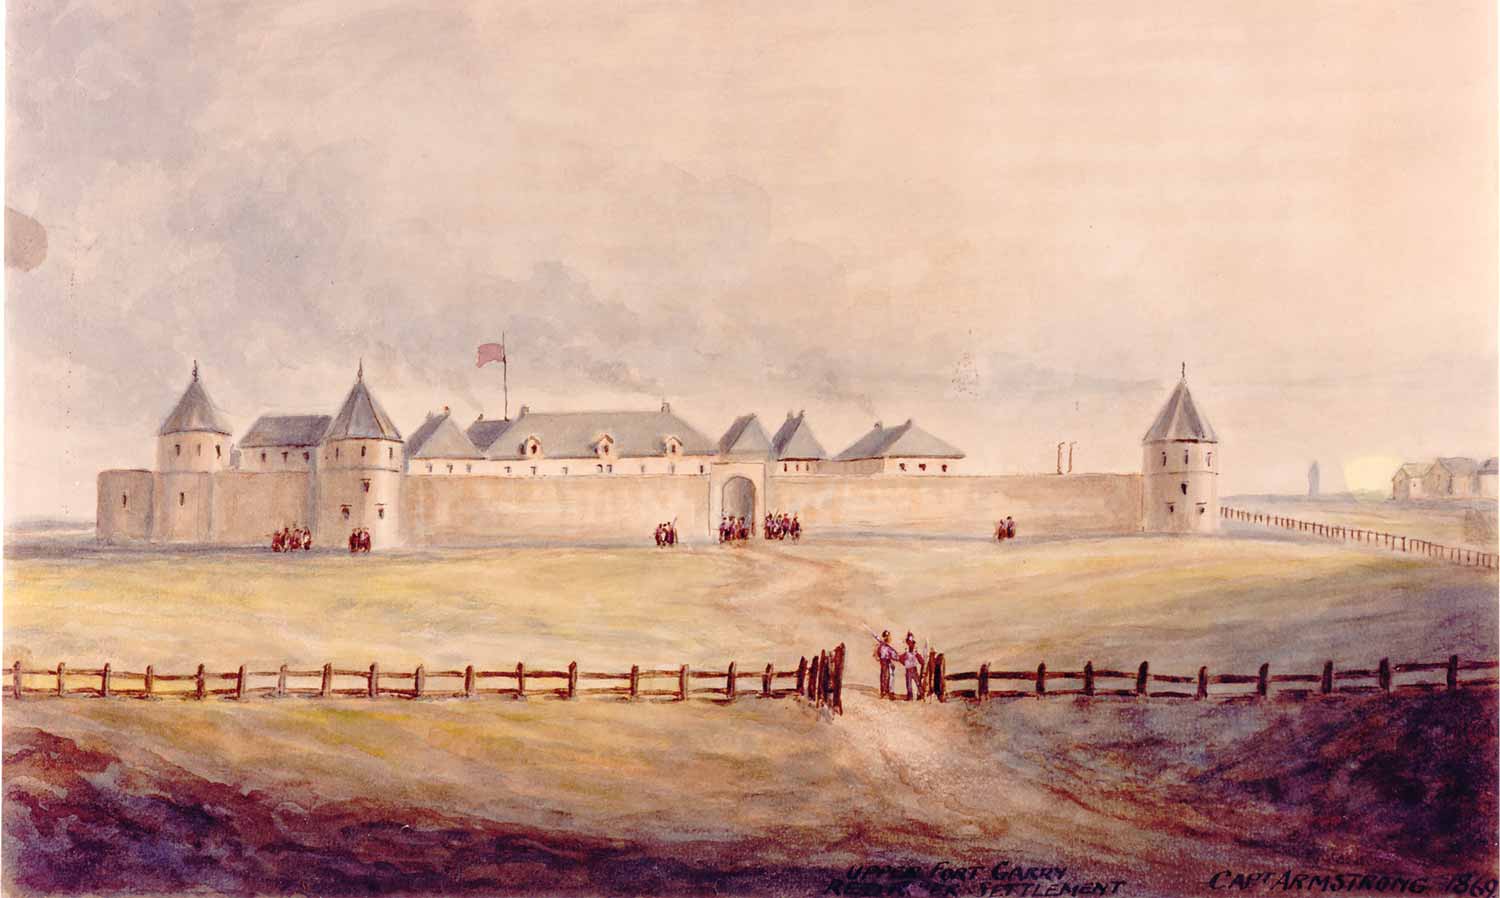 Watercolour painting showing a walled fort with a few buildings next to a river. The road in goes through a fence, which is open with a few people standing at the gate.